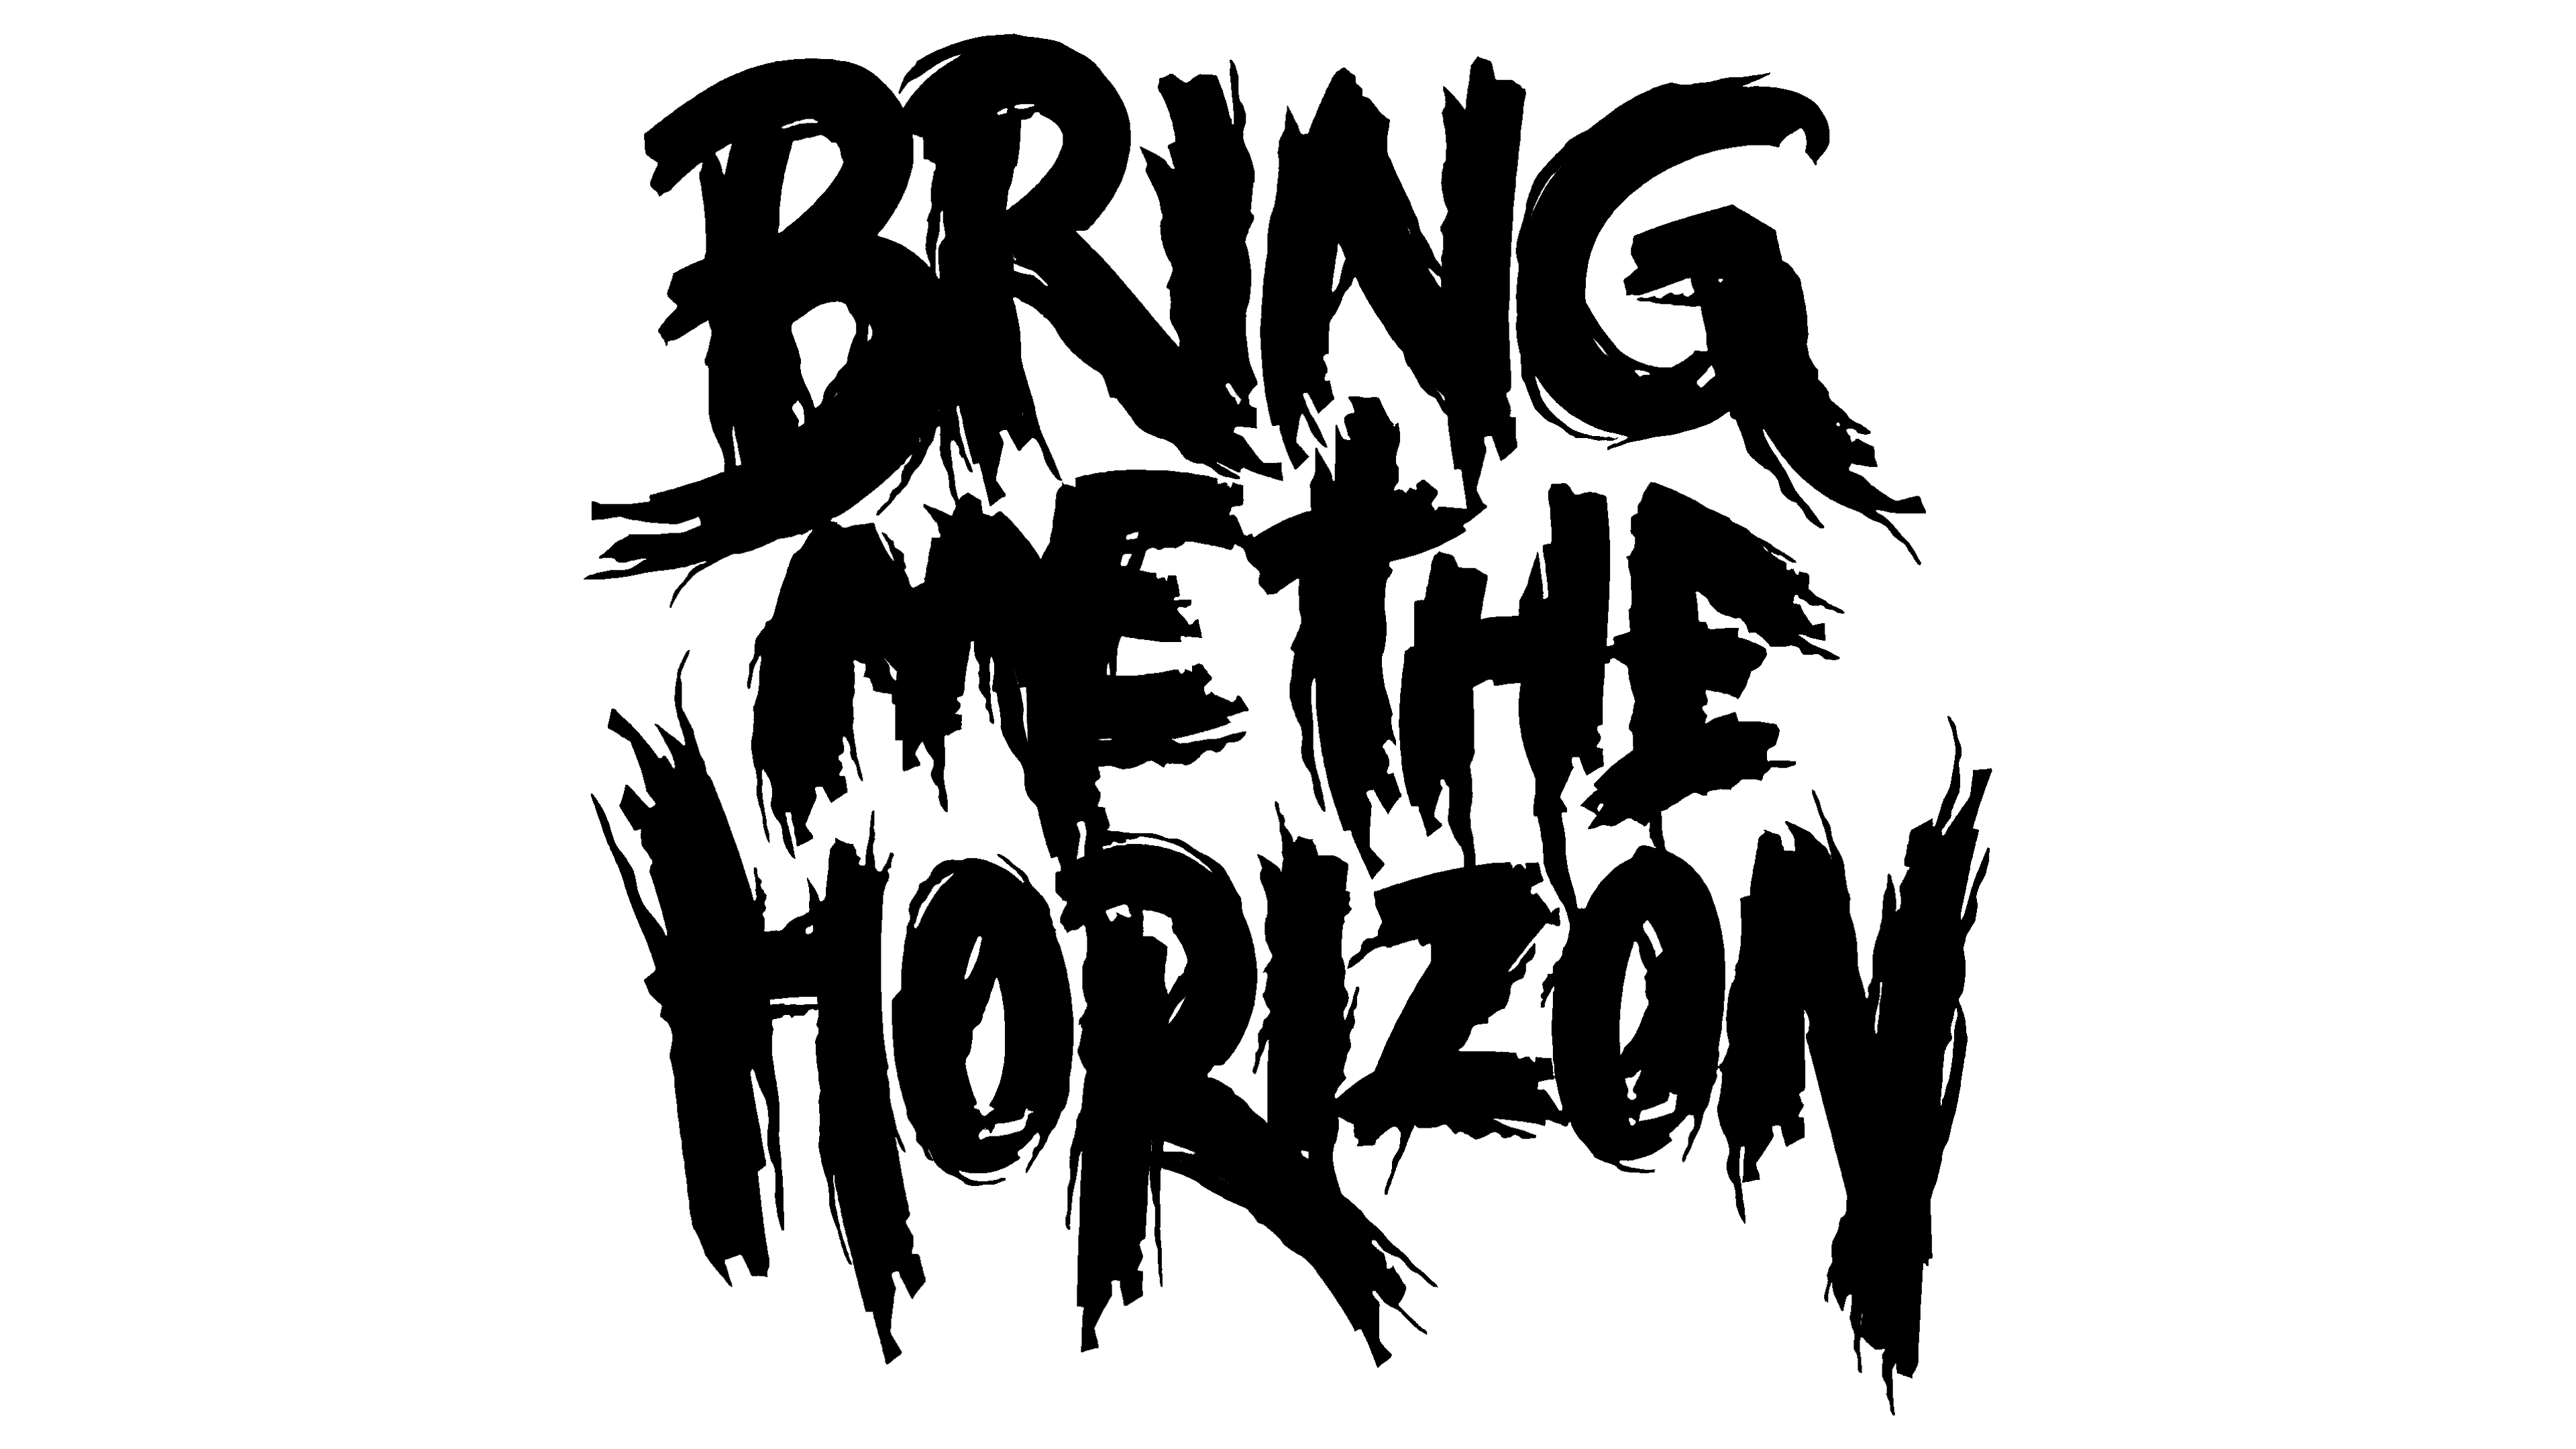 Bring Me the Horizon review, Amo: Daring album is likely to divide